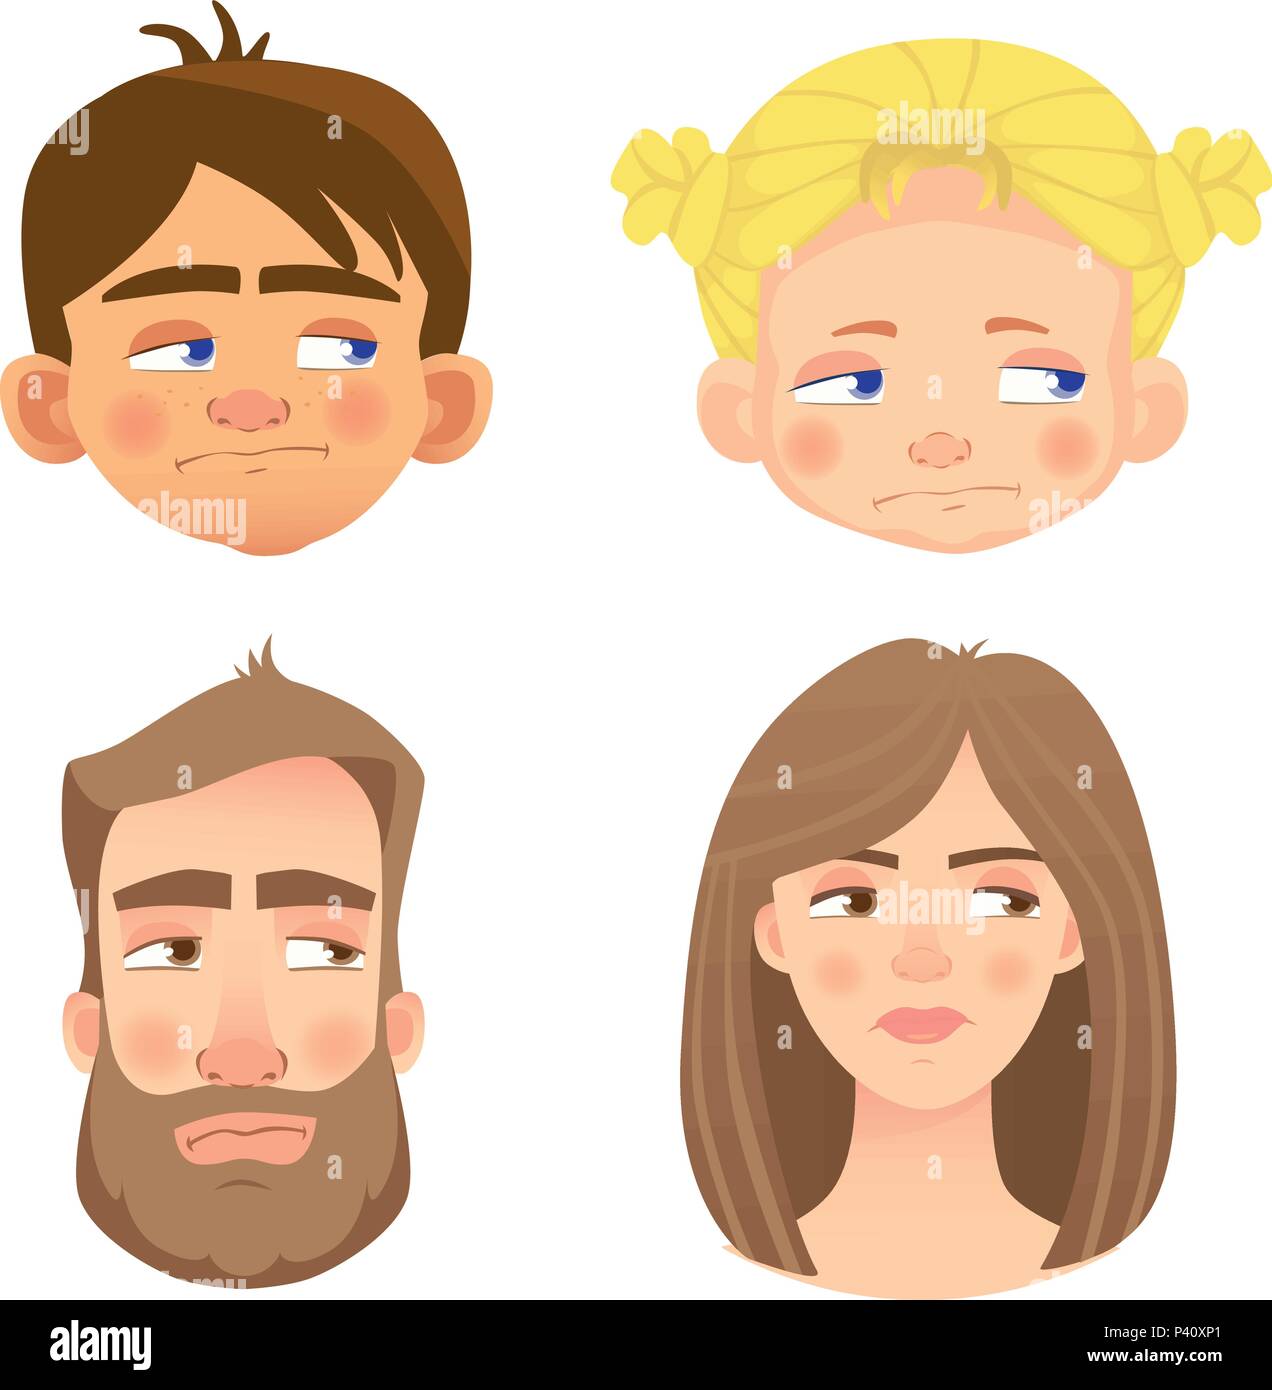 Emotions of human face. Set of human faces expressing emotions. Vector illustration Stock Vector